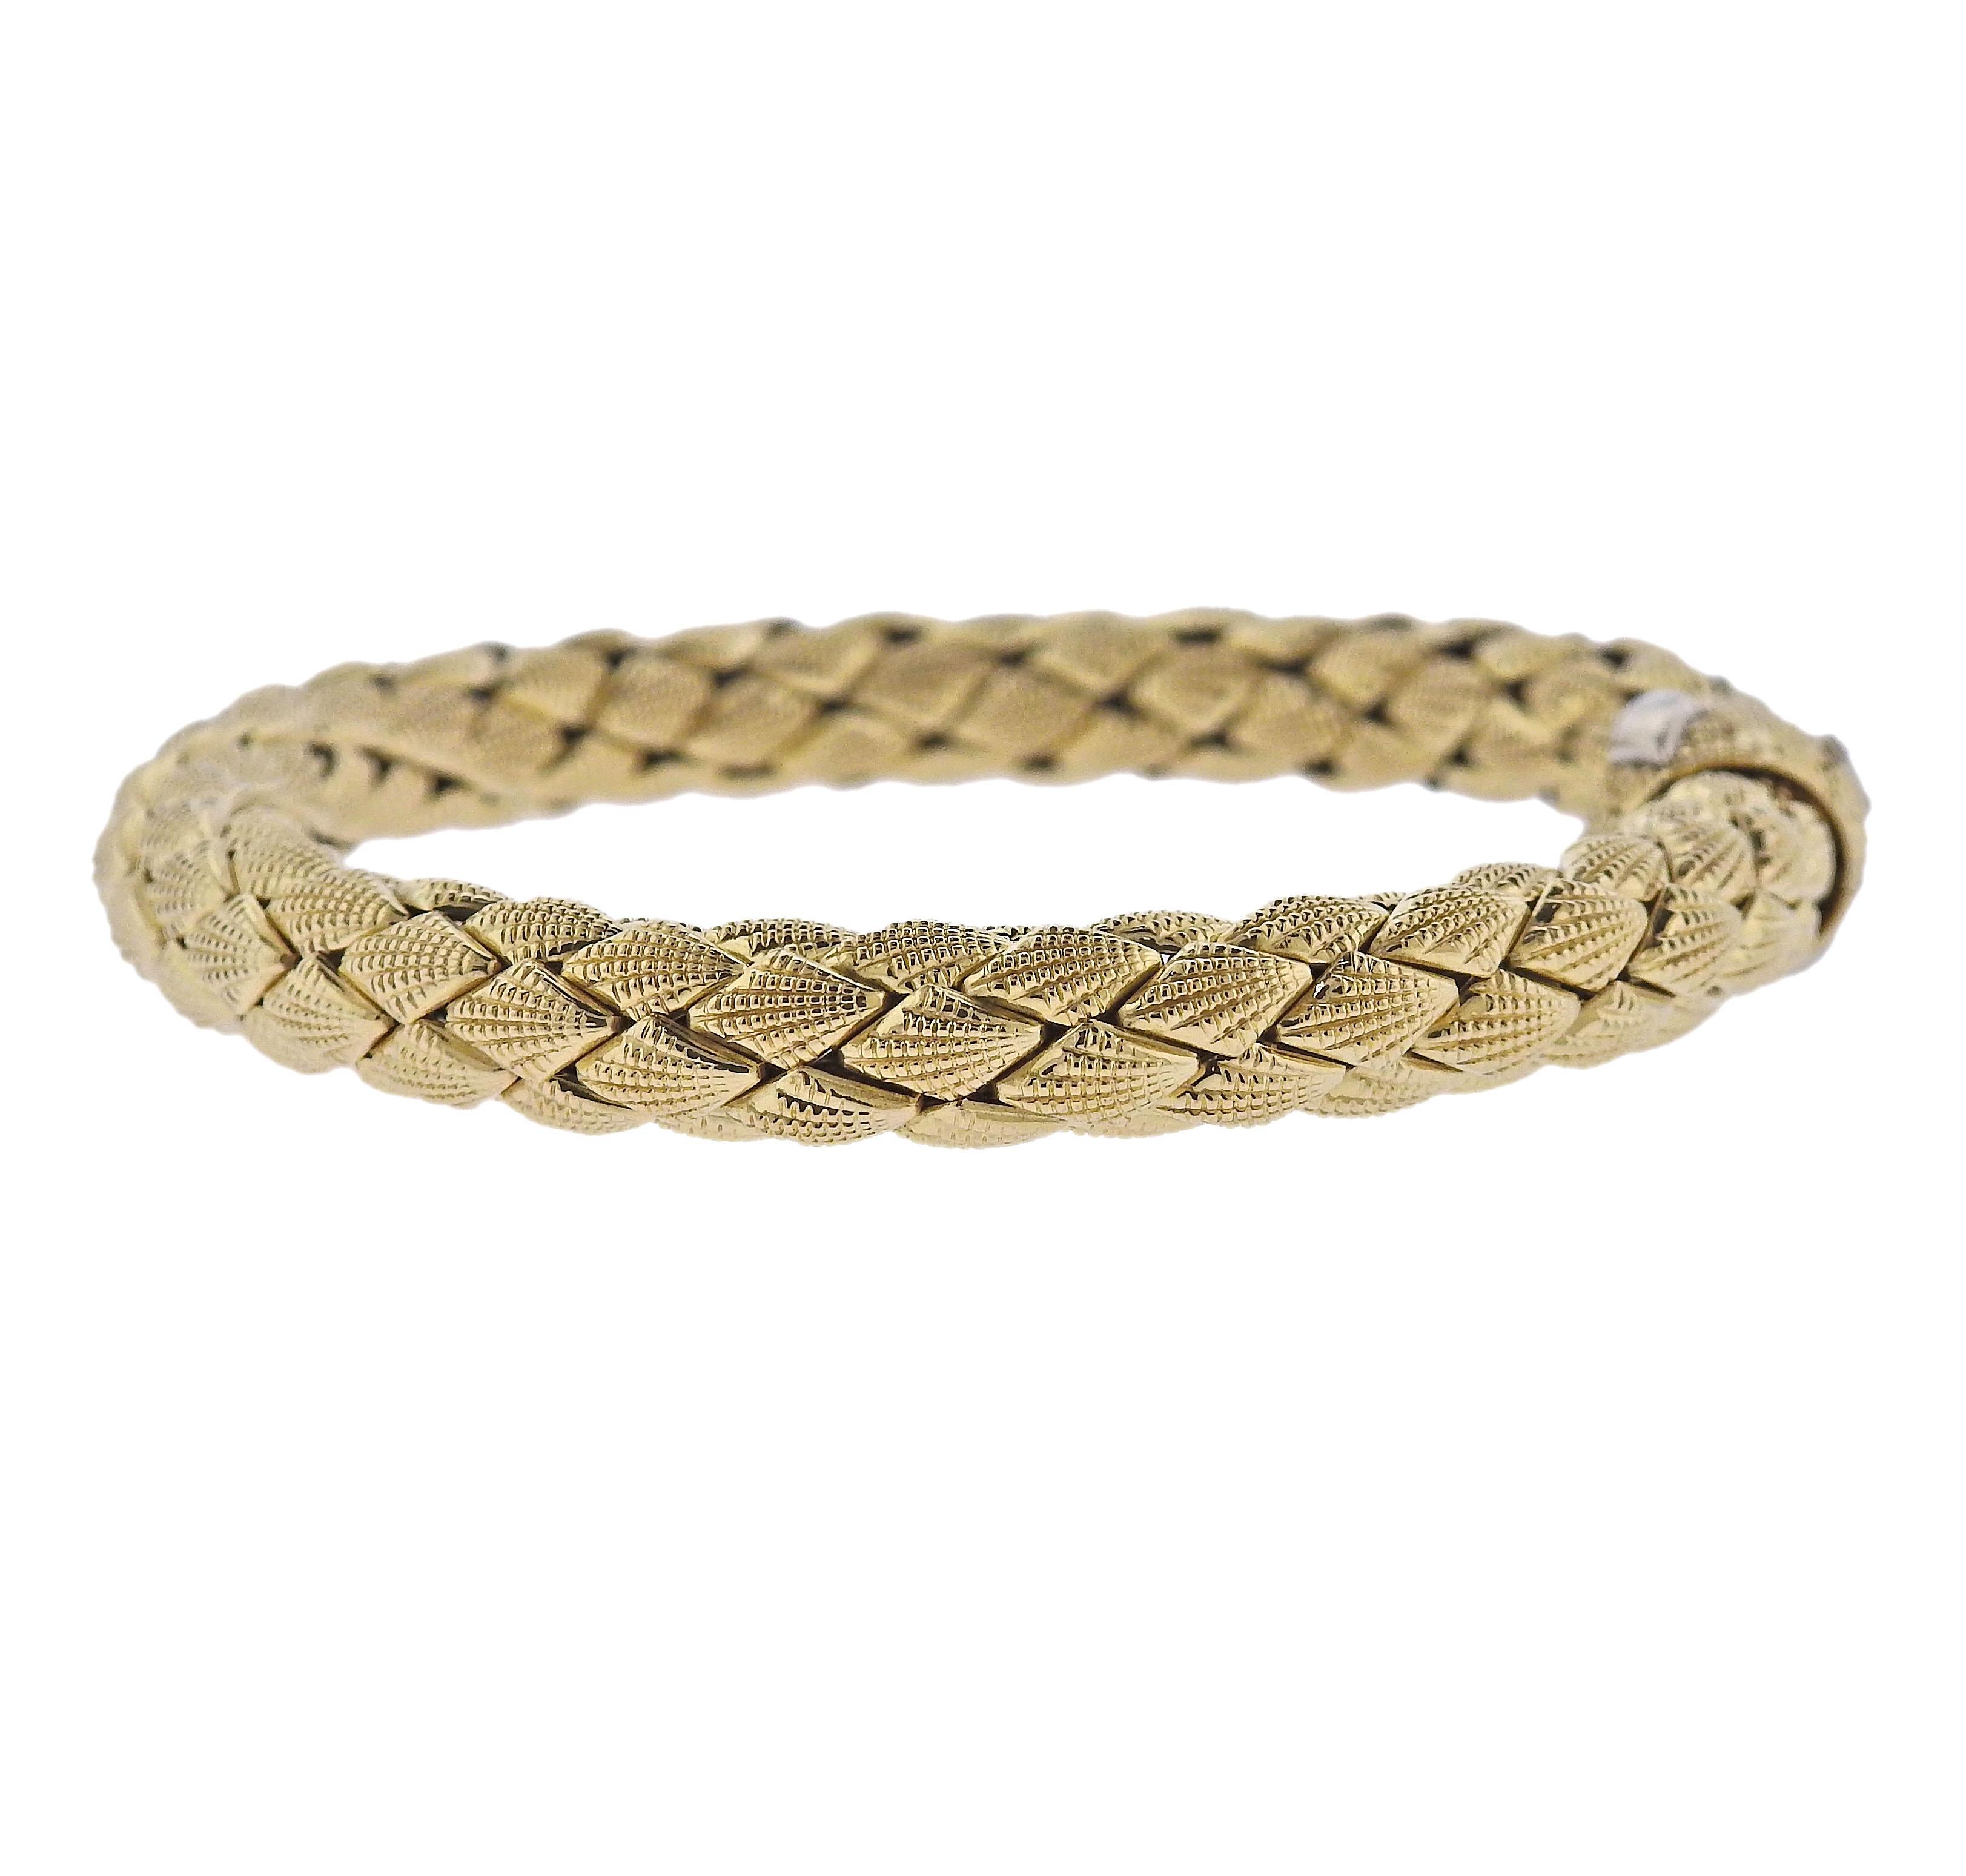 18k yellow gold braided bracelet by Chimento, with 0.01ct H/VS diamond on the clasp. Bracelet is 8